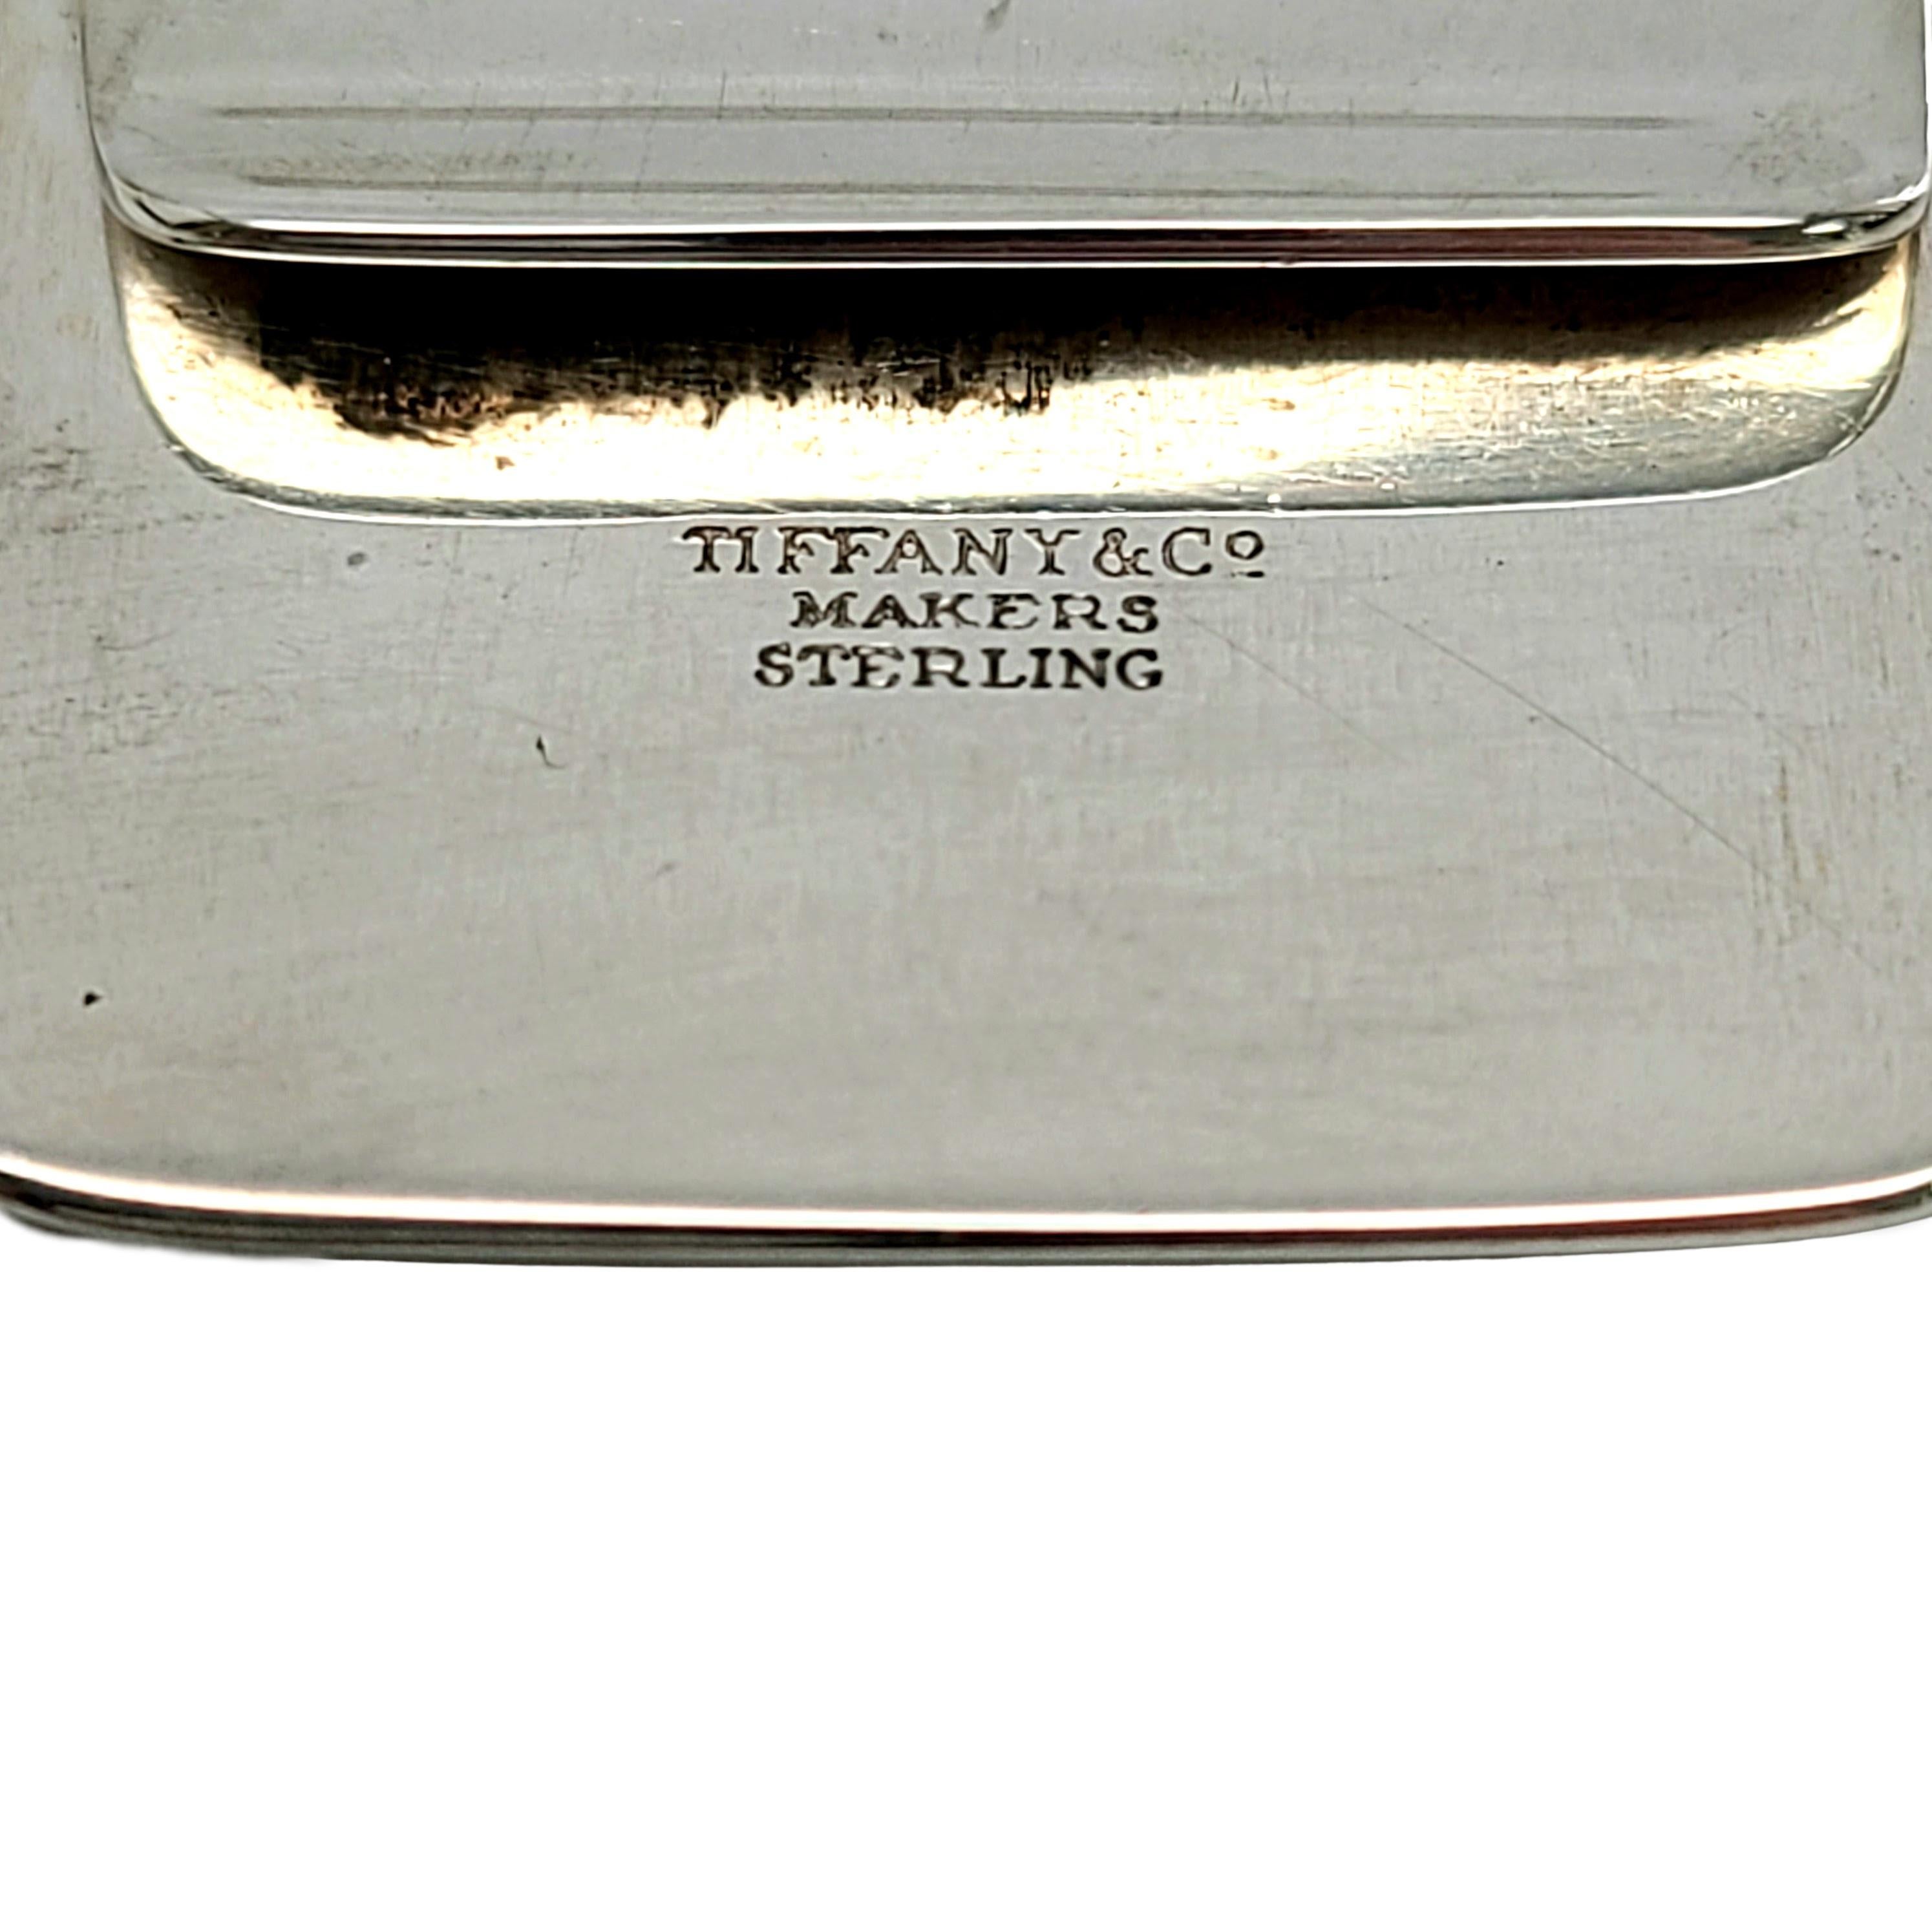 Women's or Men's Tiffany & Co Sterling Silver Large Money or Card Clip